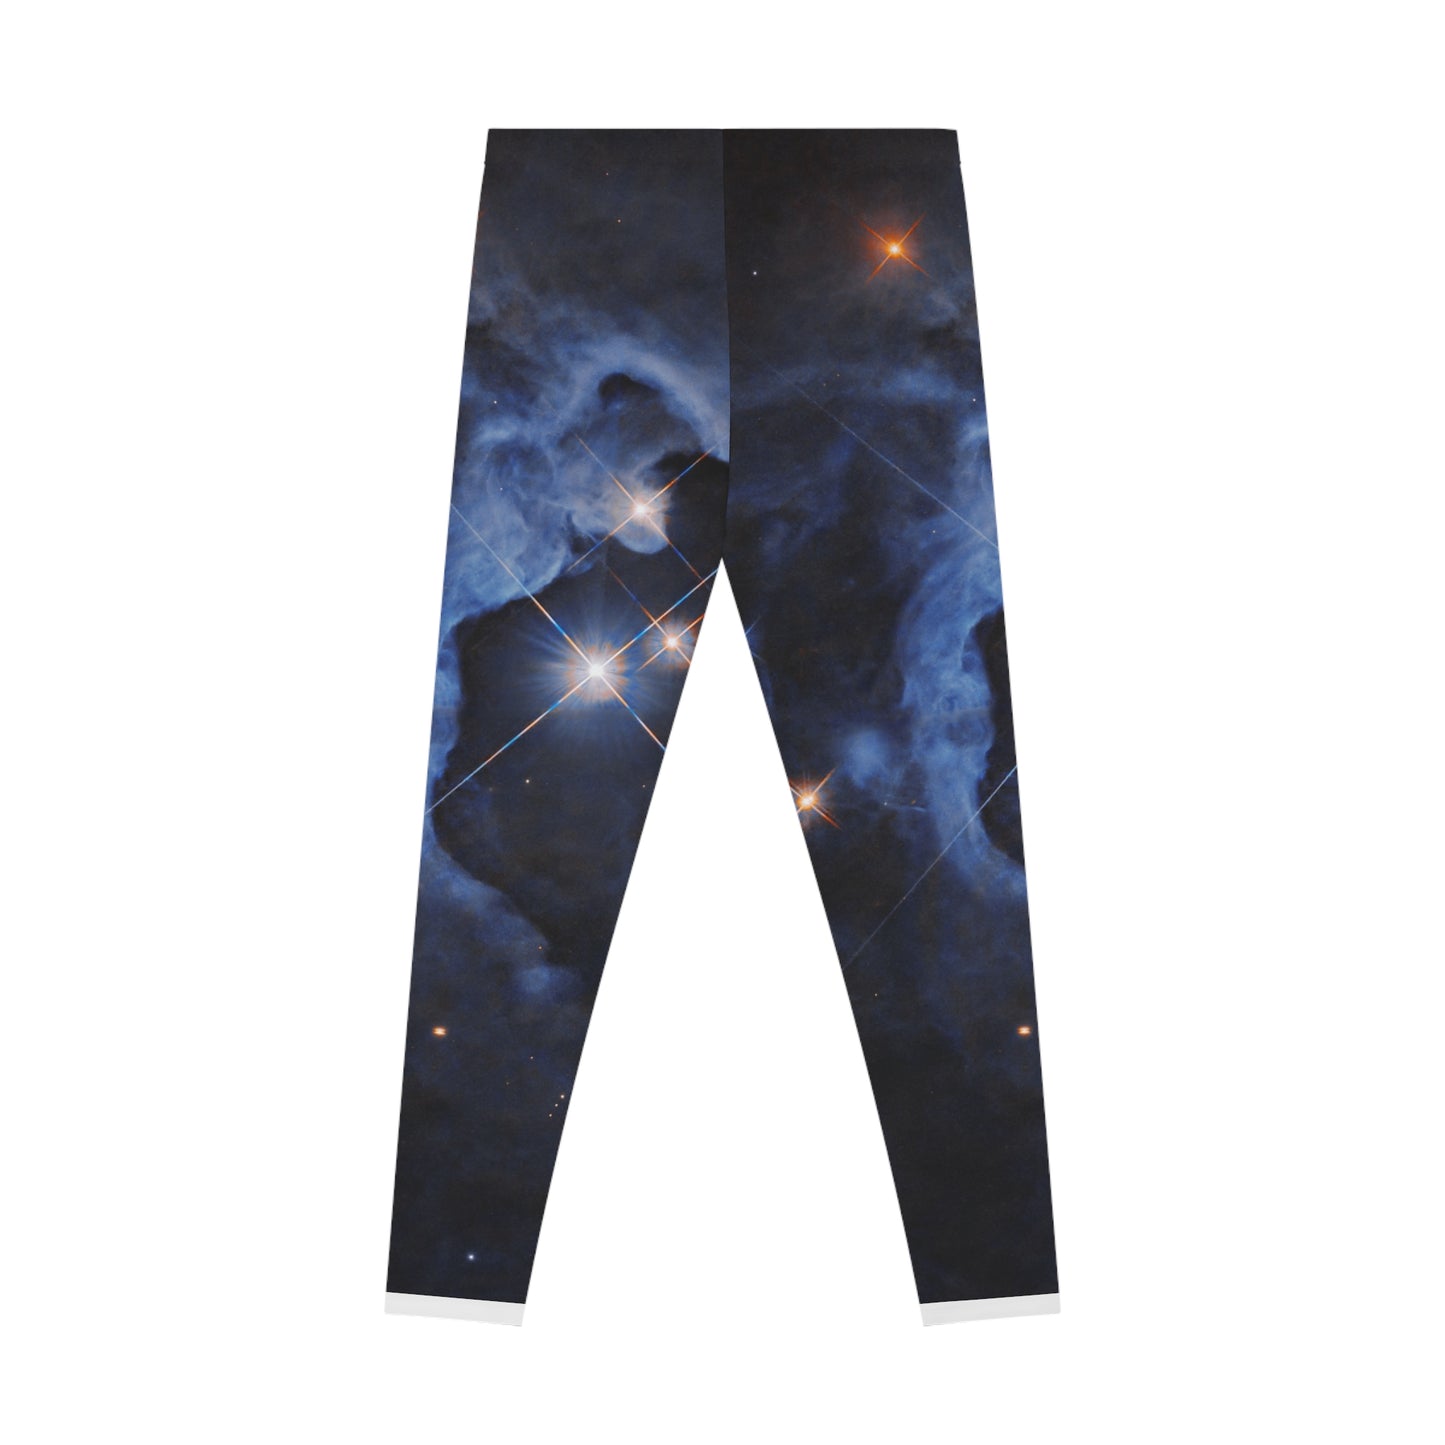 HP Tau, HP Tau G2, and G3 3 star system captured by Hubble - Unisex Tights